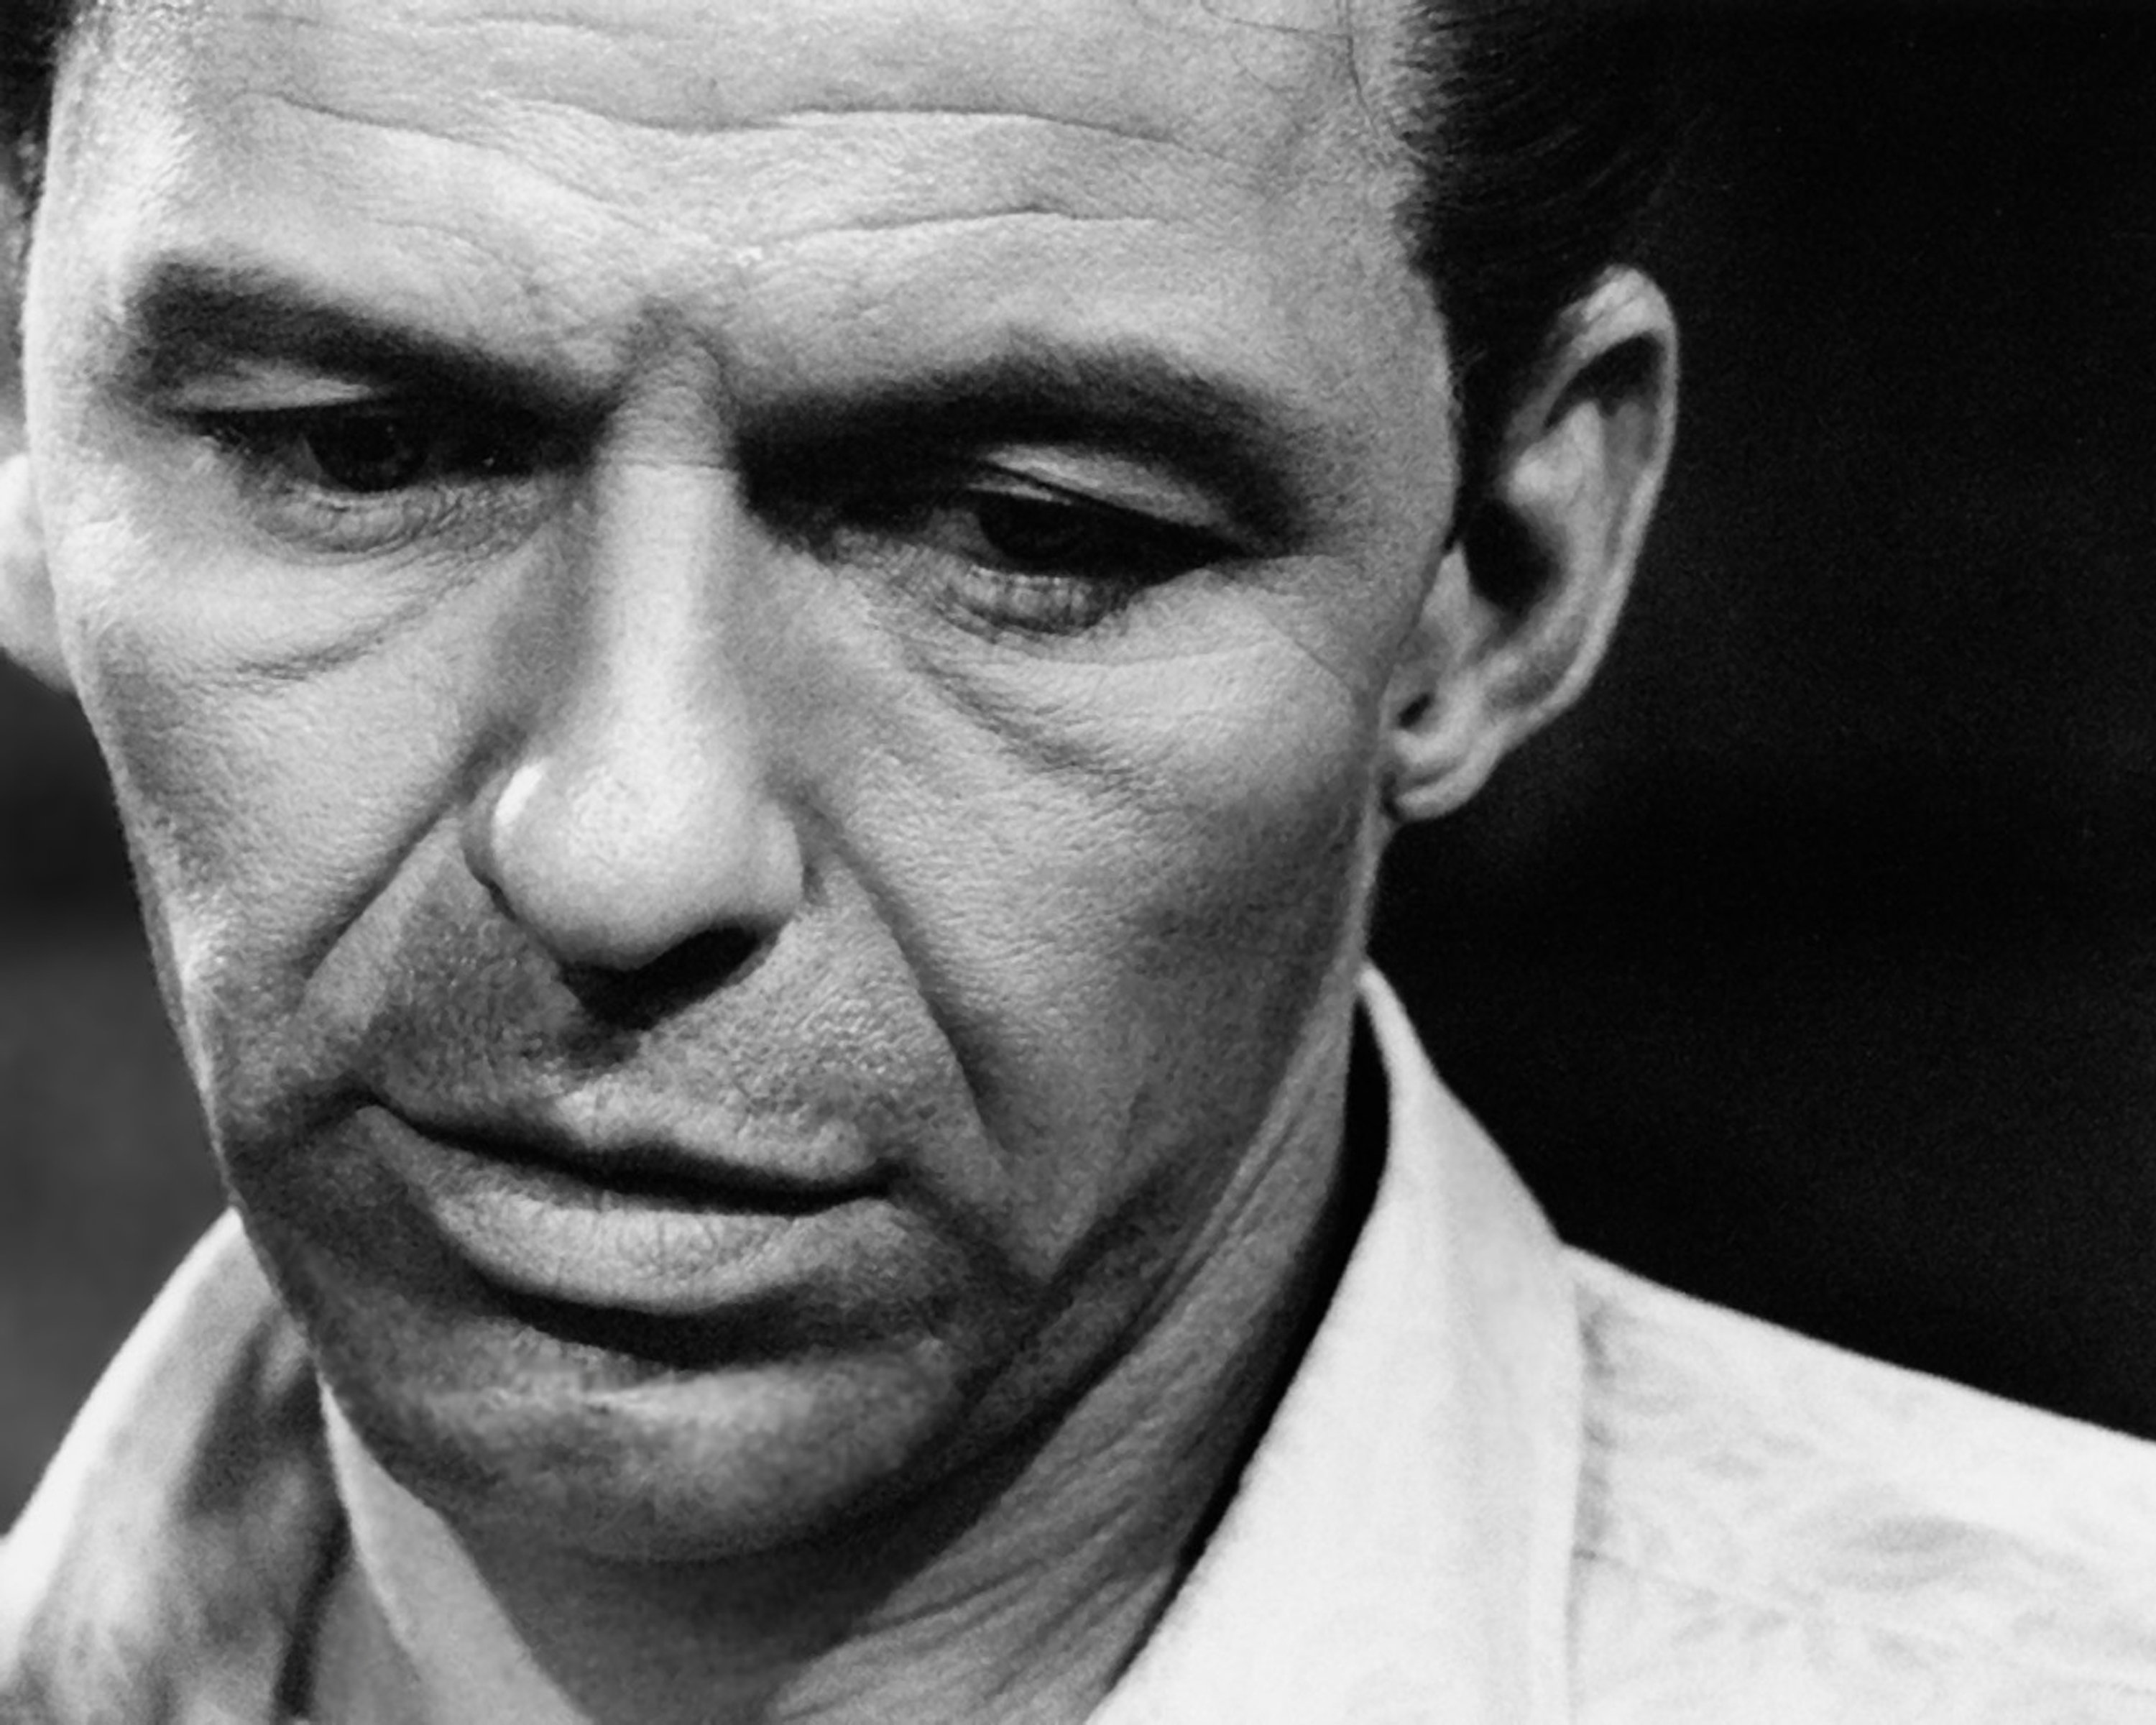 A black and white picture of Frank Sinatra wearing a white collared shirt.